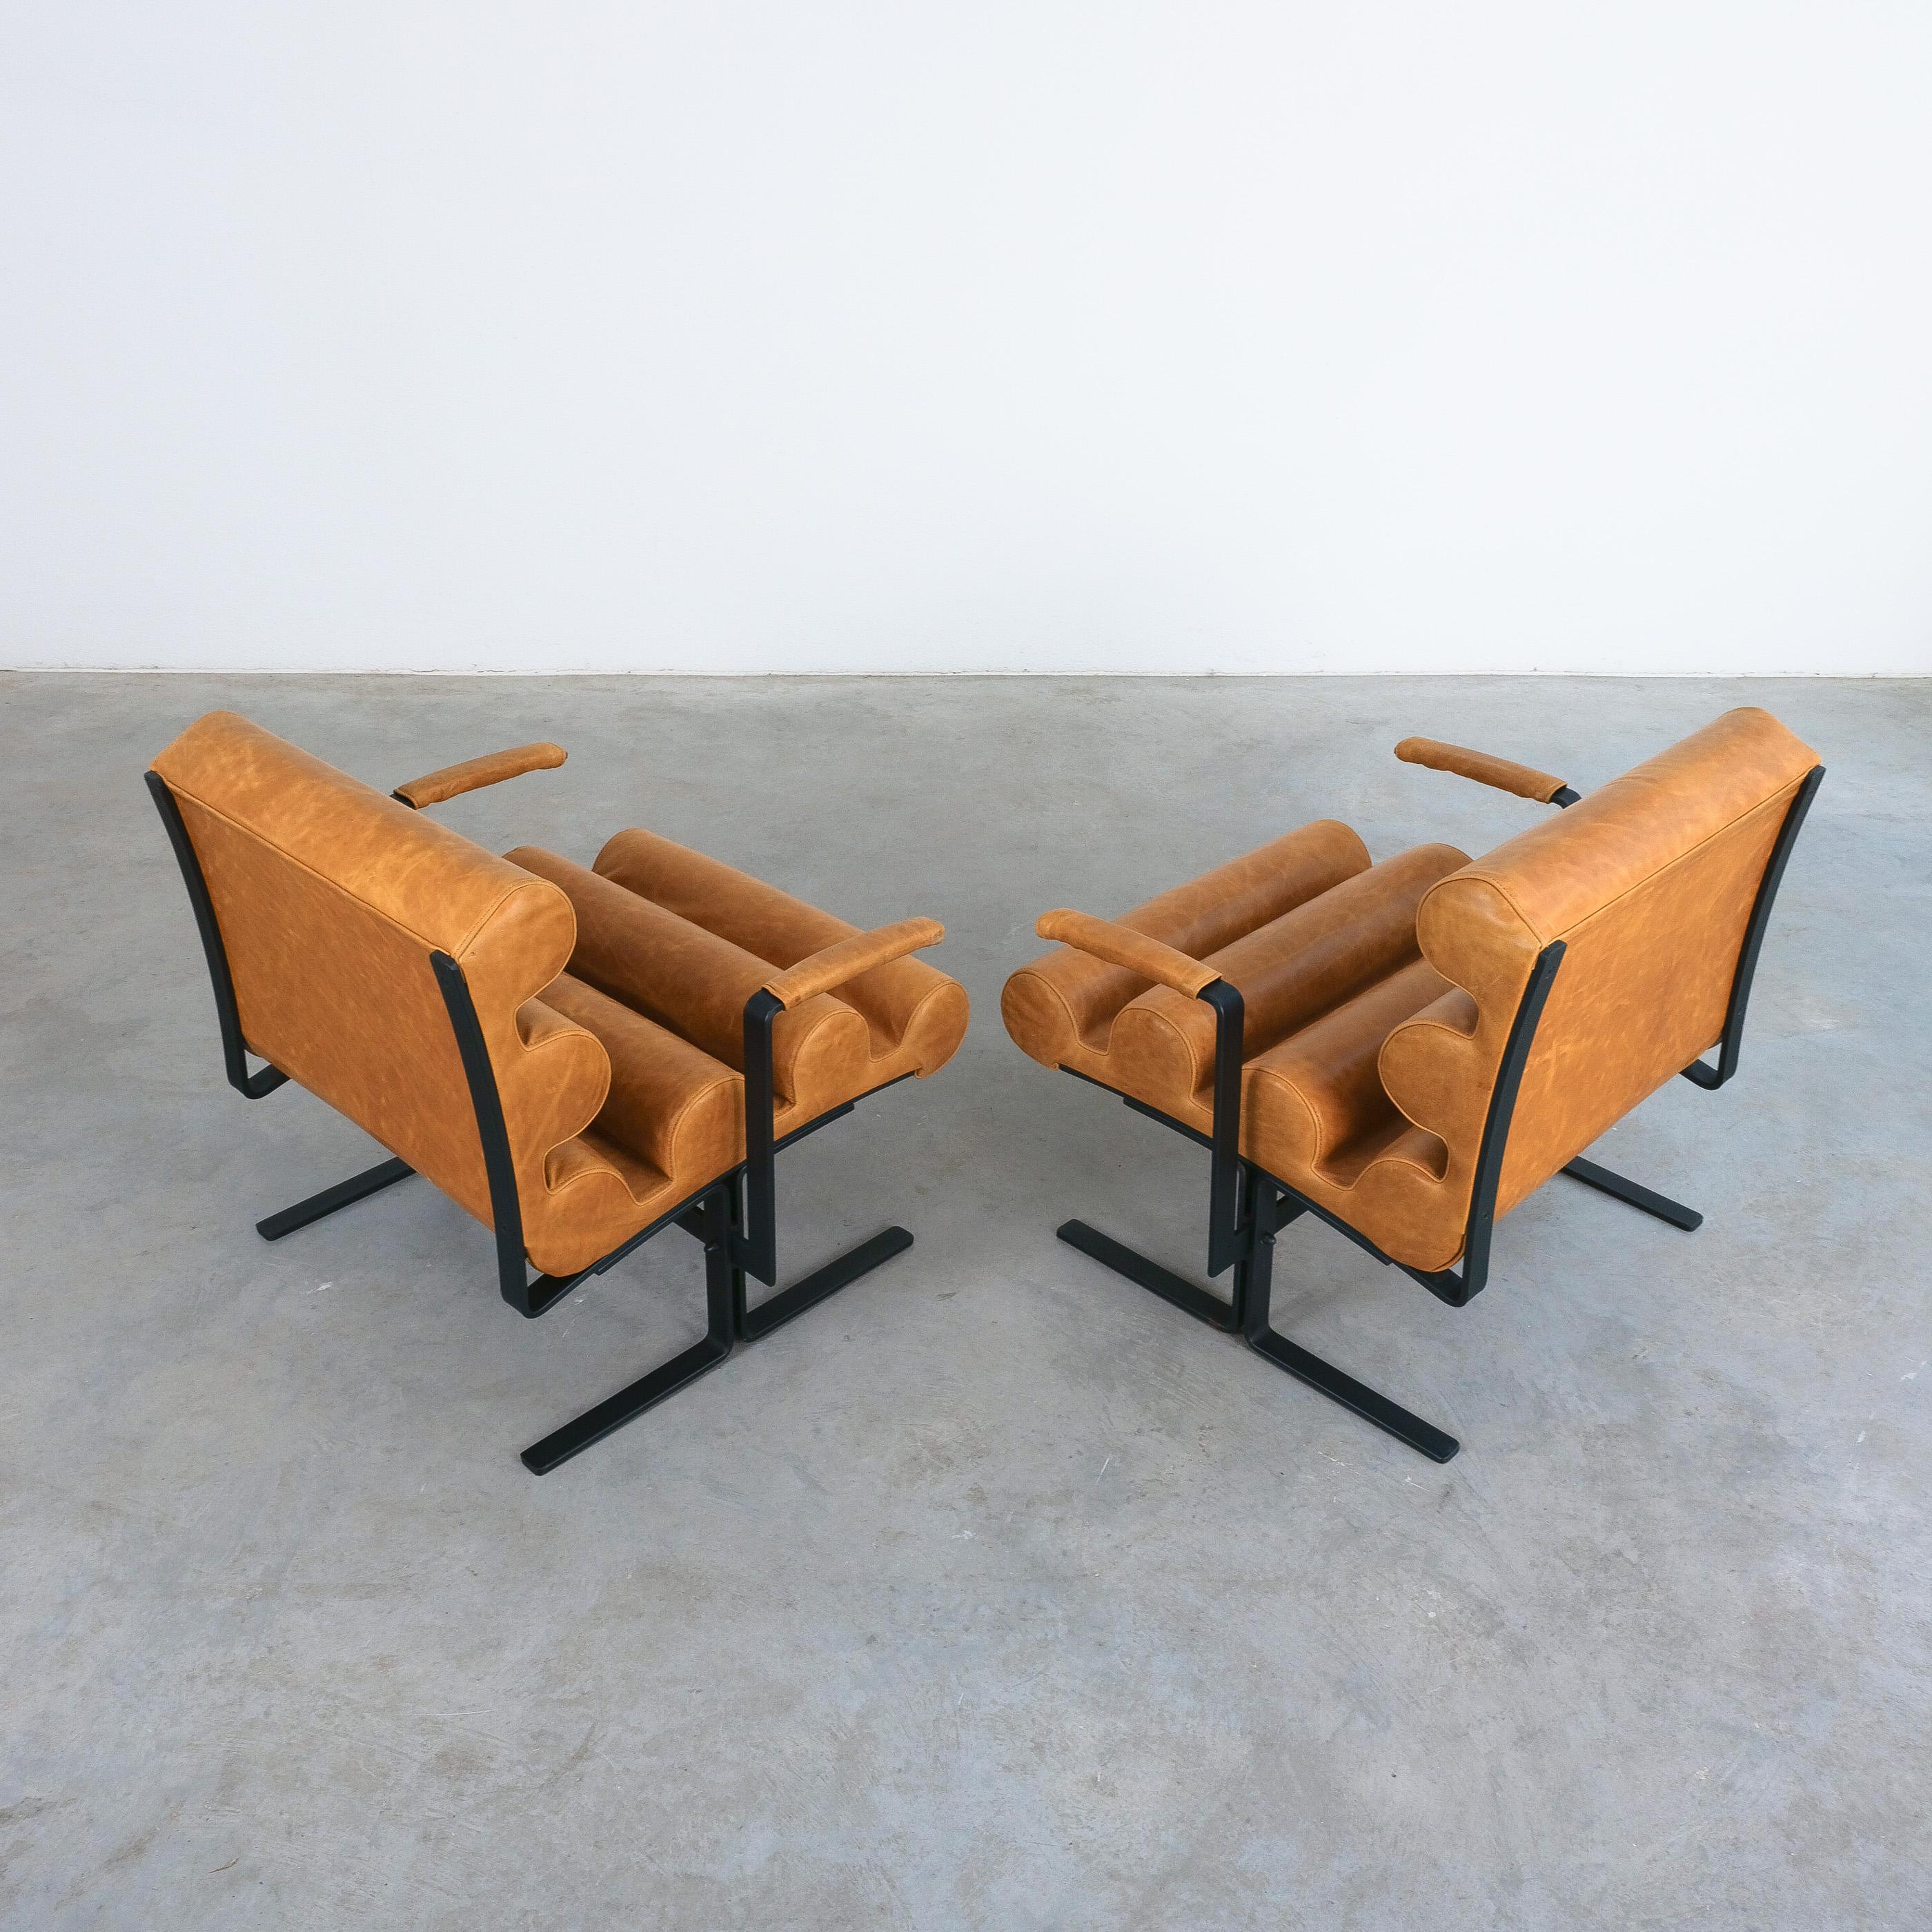 Joe Colombo For Sormani Roll Brown Leather Spring Steel Armchair Pair (2) , 1962 For Sale 12